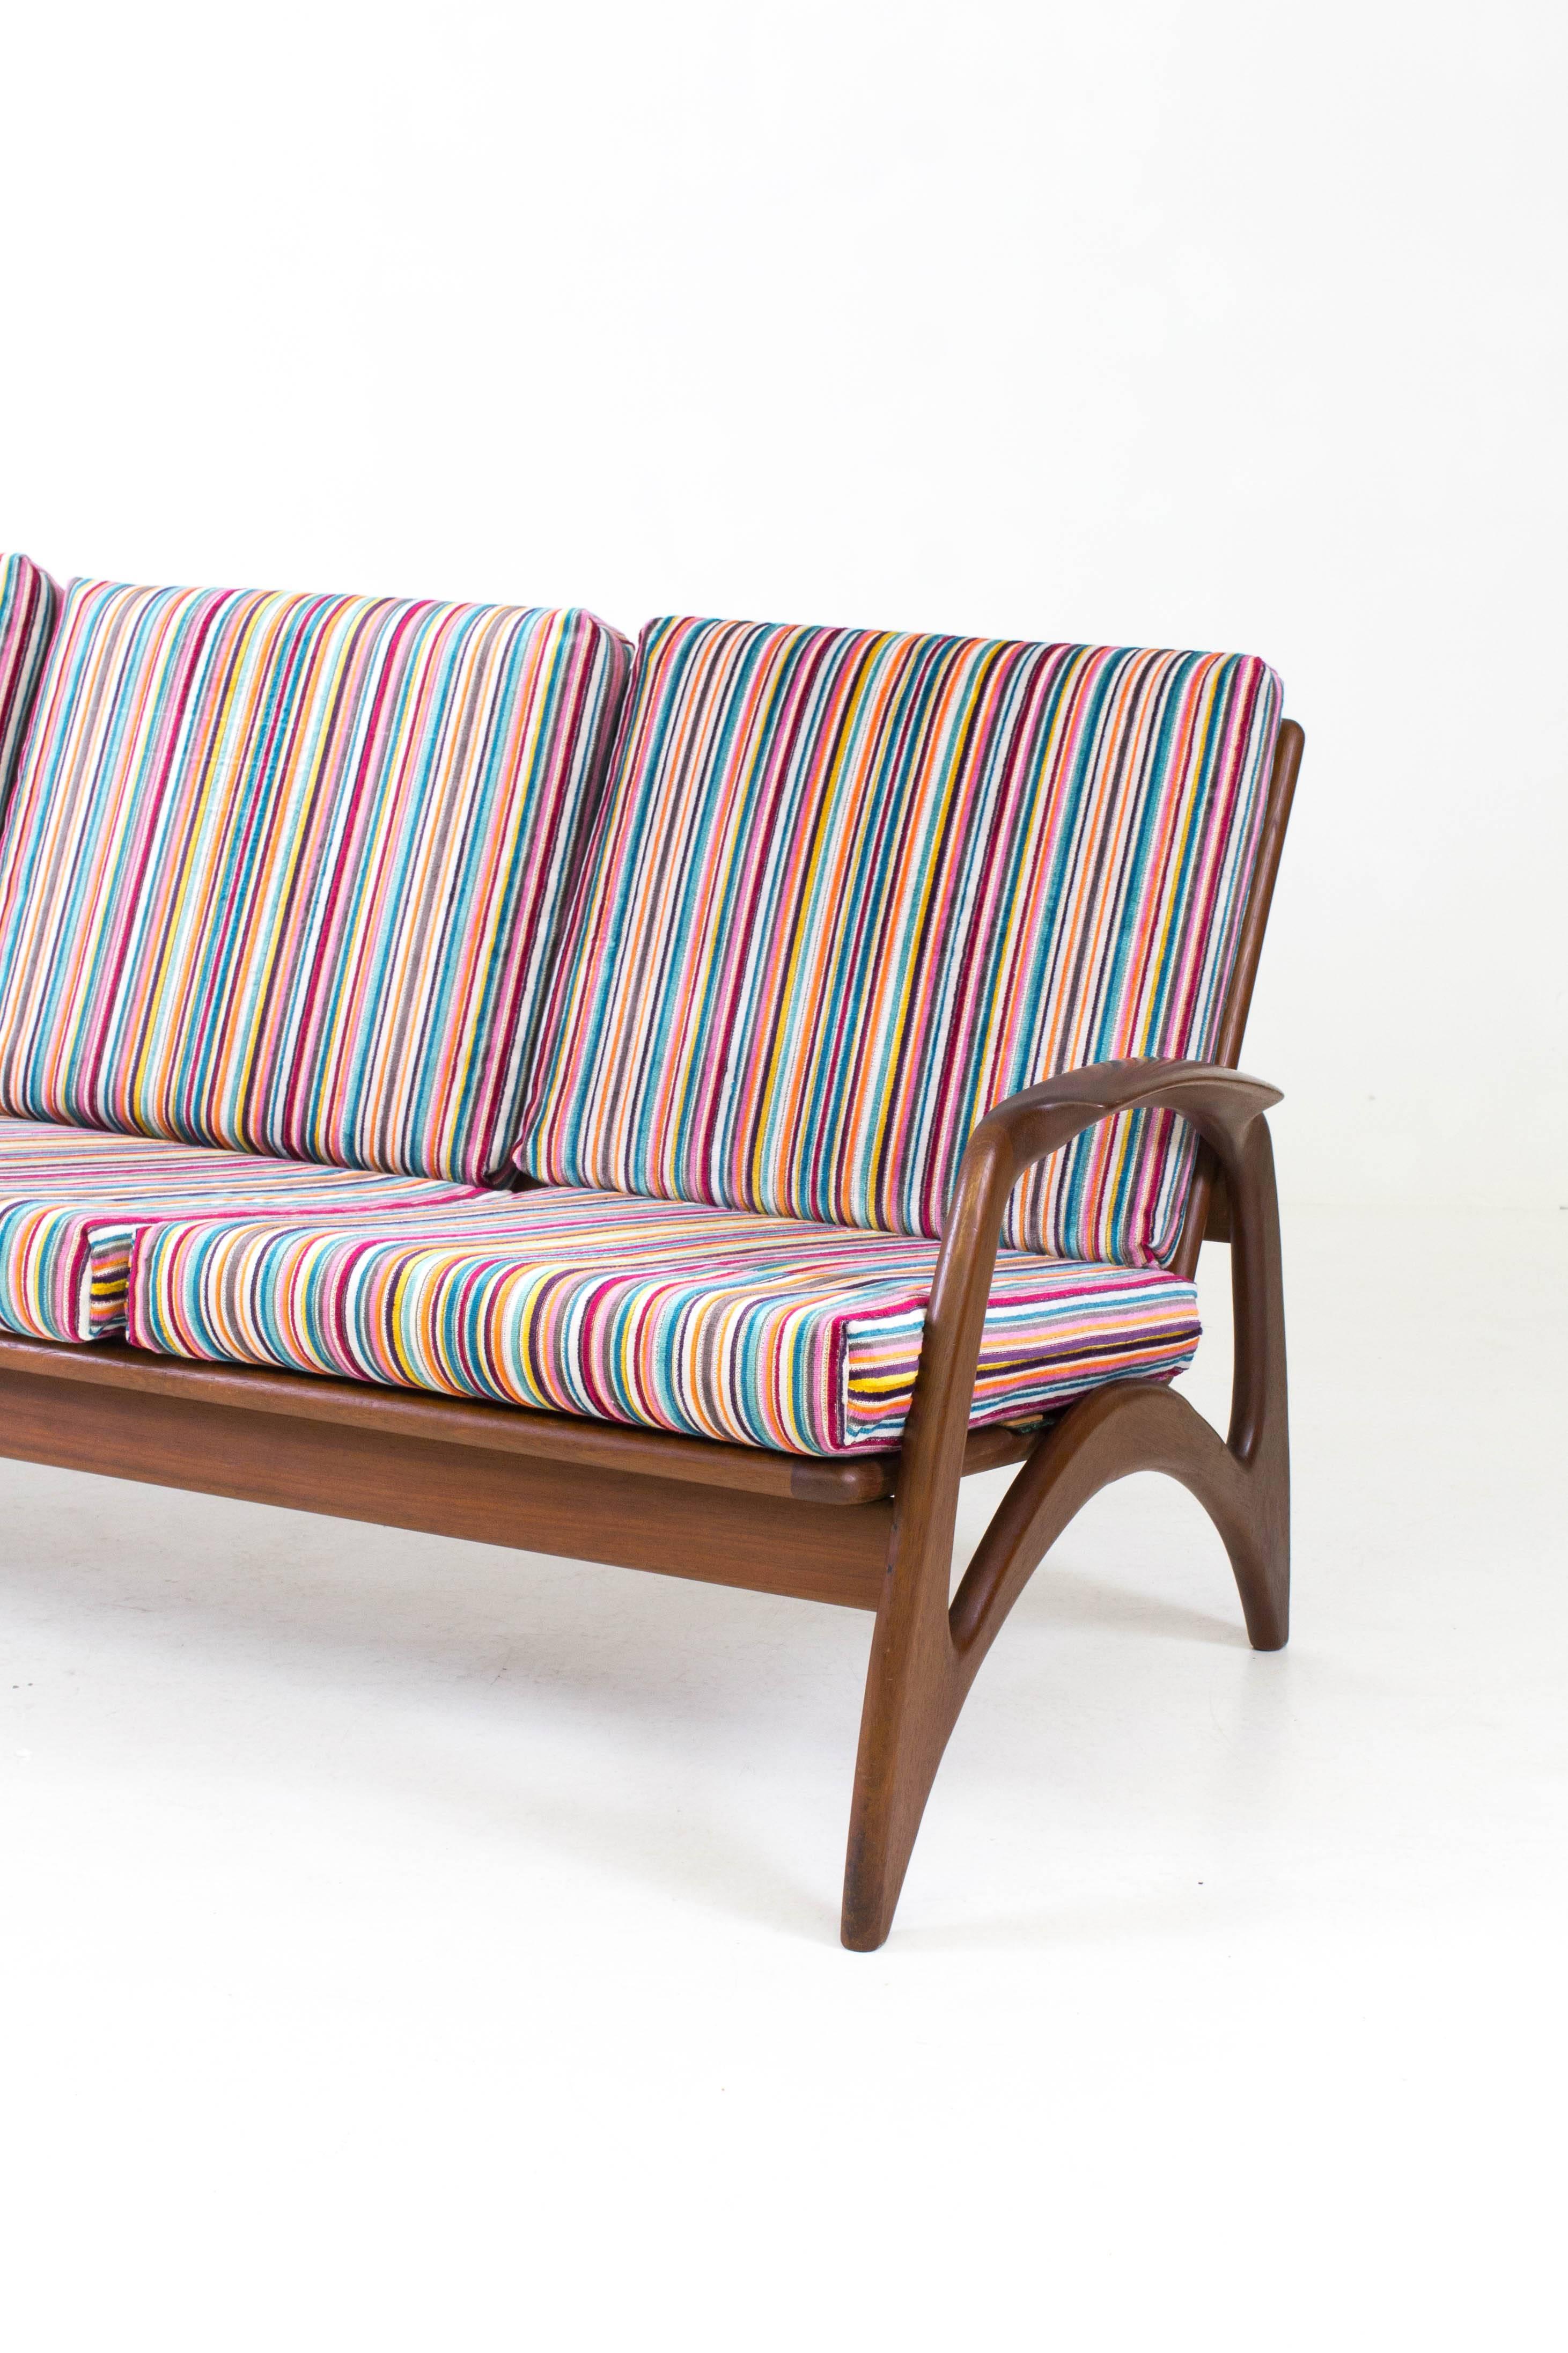 Mid-Century Modern organic teak sofa or bench by De Ster Gelderland, 1960s.
Re-upholstered in quality Italian fabric.
Striking design.
In good original condition with minor wear consistent with age and use.
    